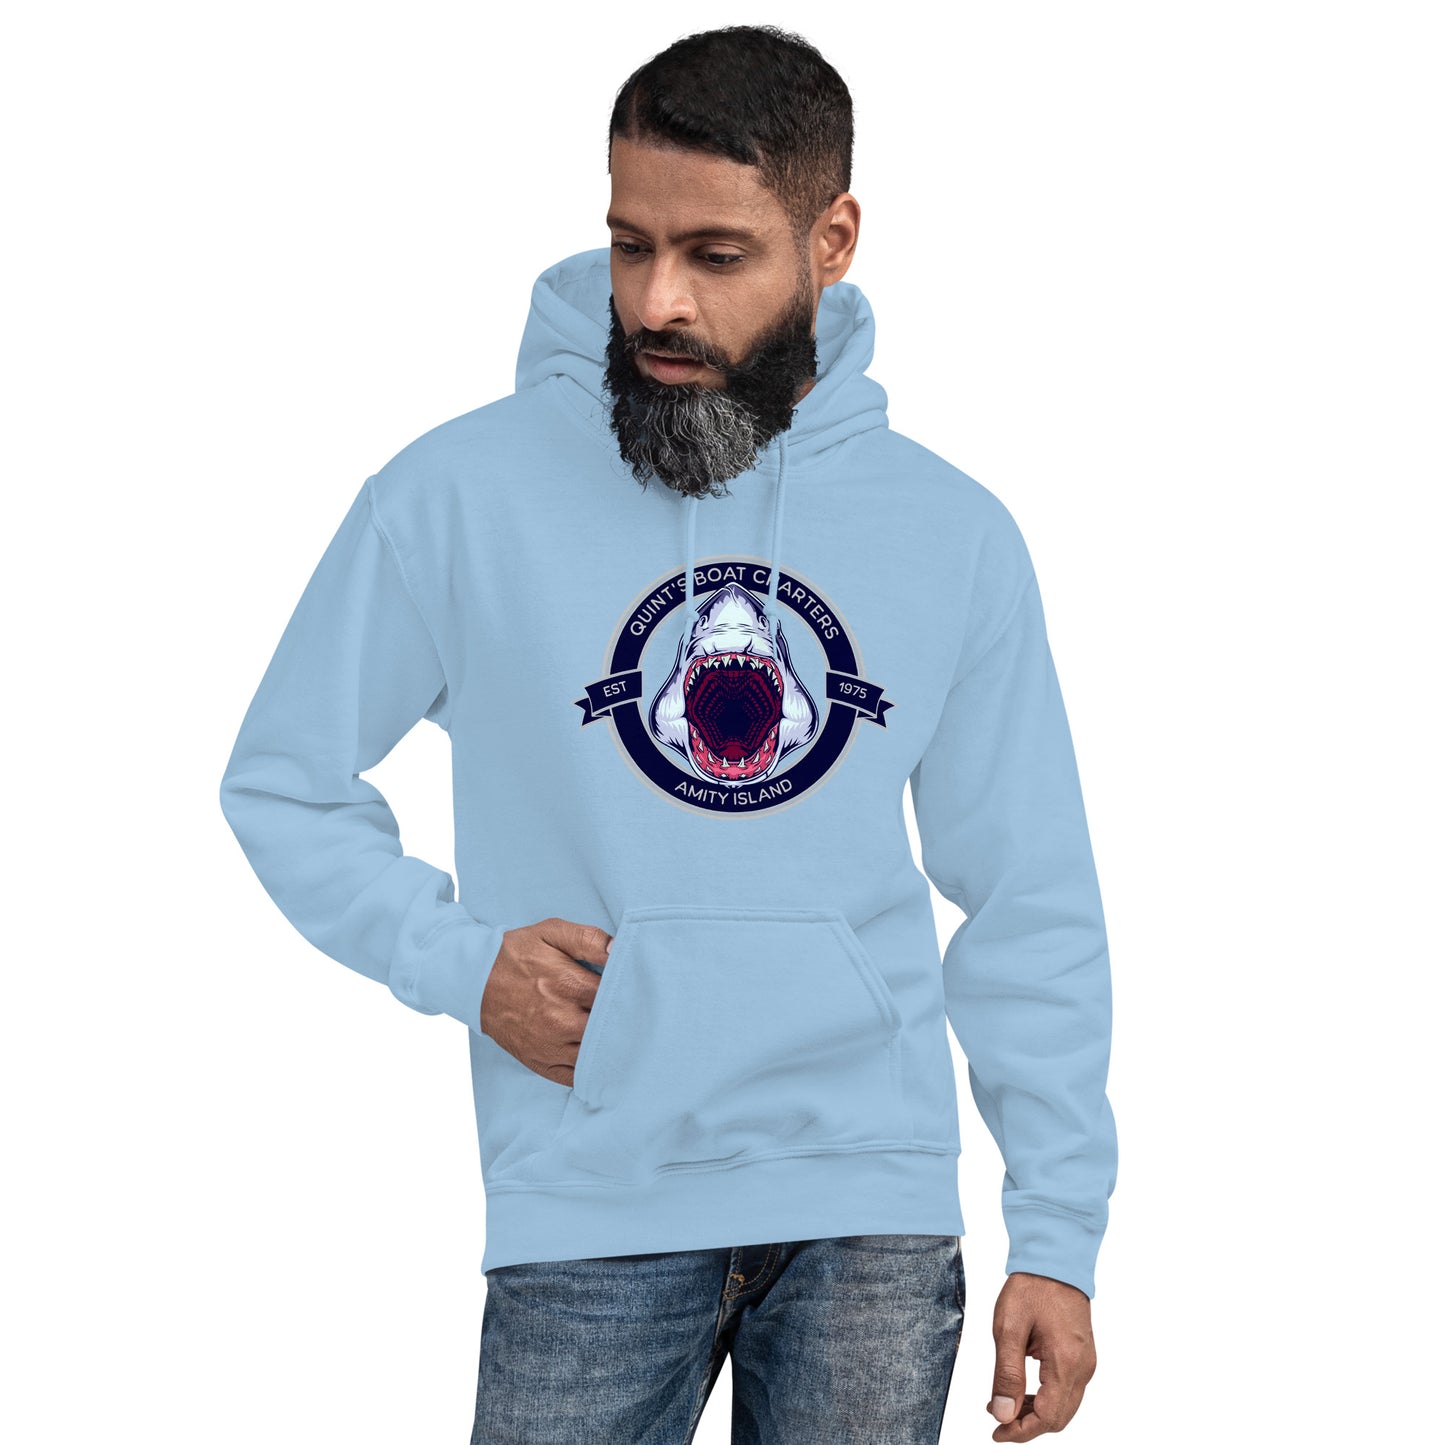 Quint's Boat Charters Unisex Hoodie